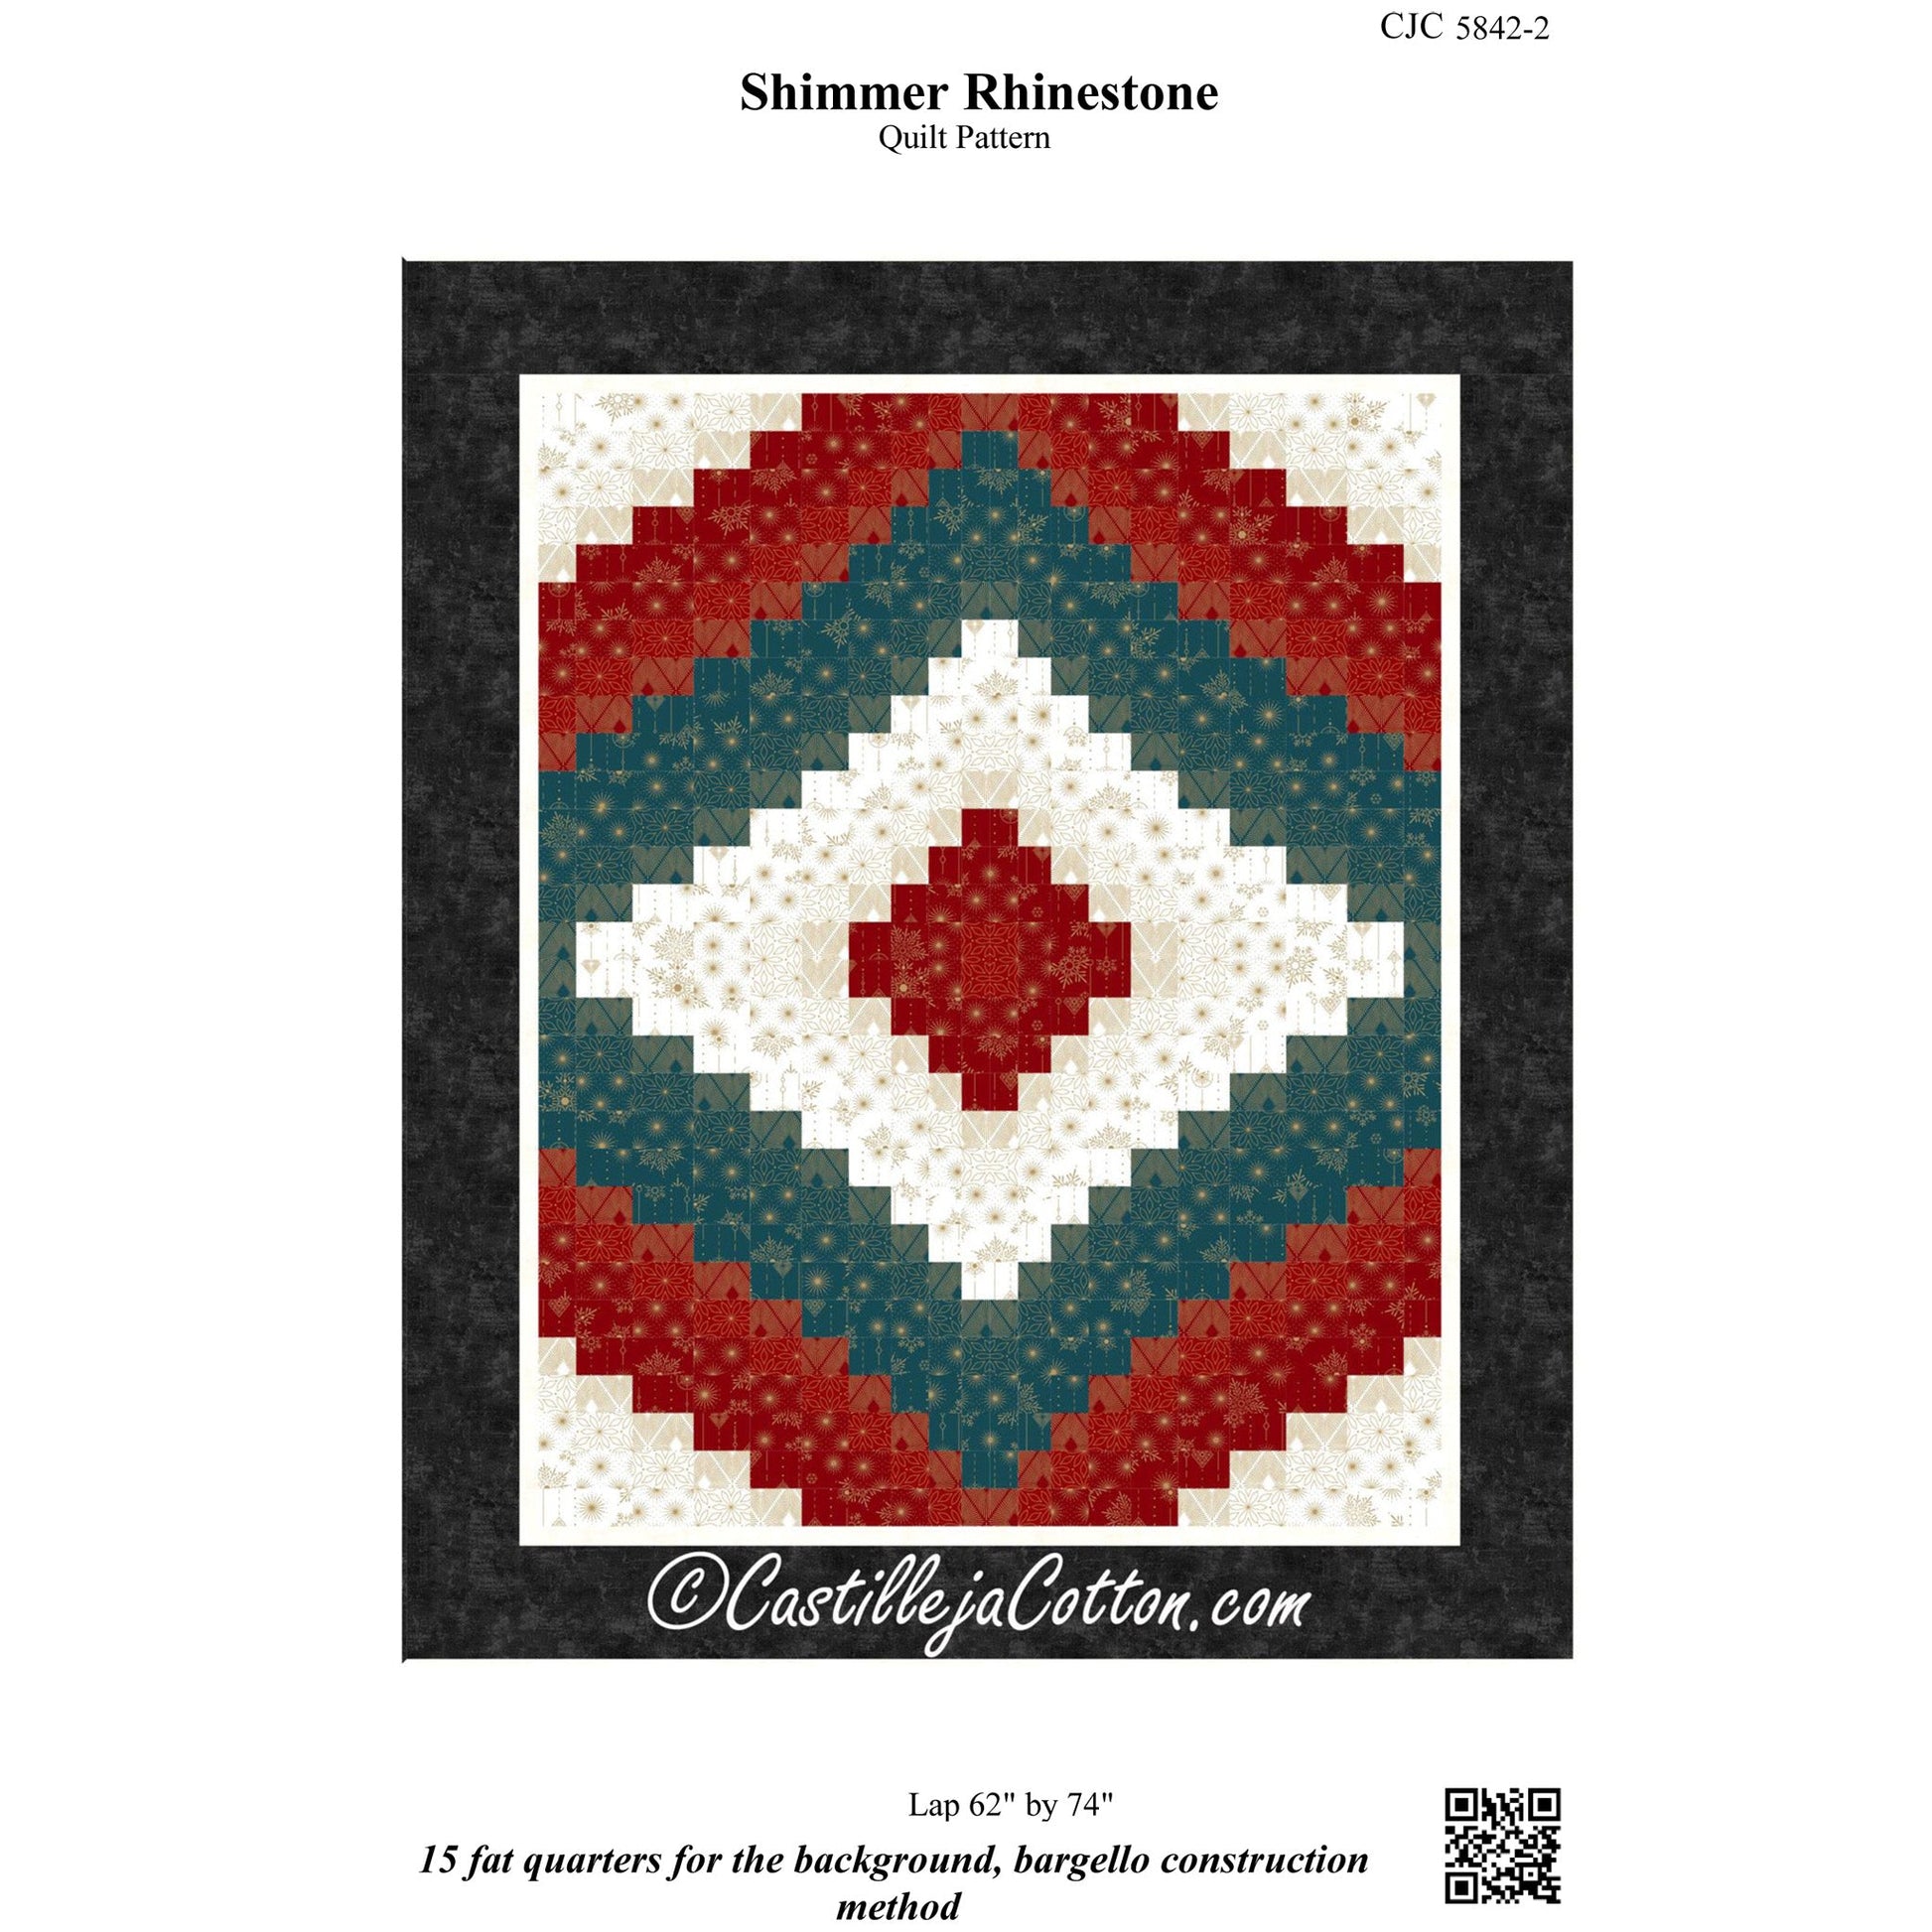 Cover image of pattern for Shimmer Rhinestone Quilt.